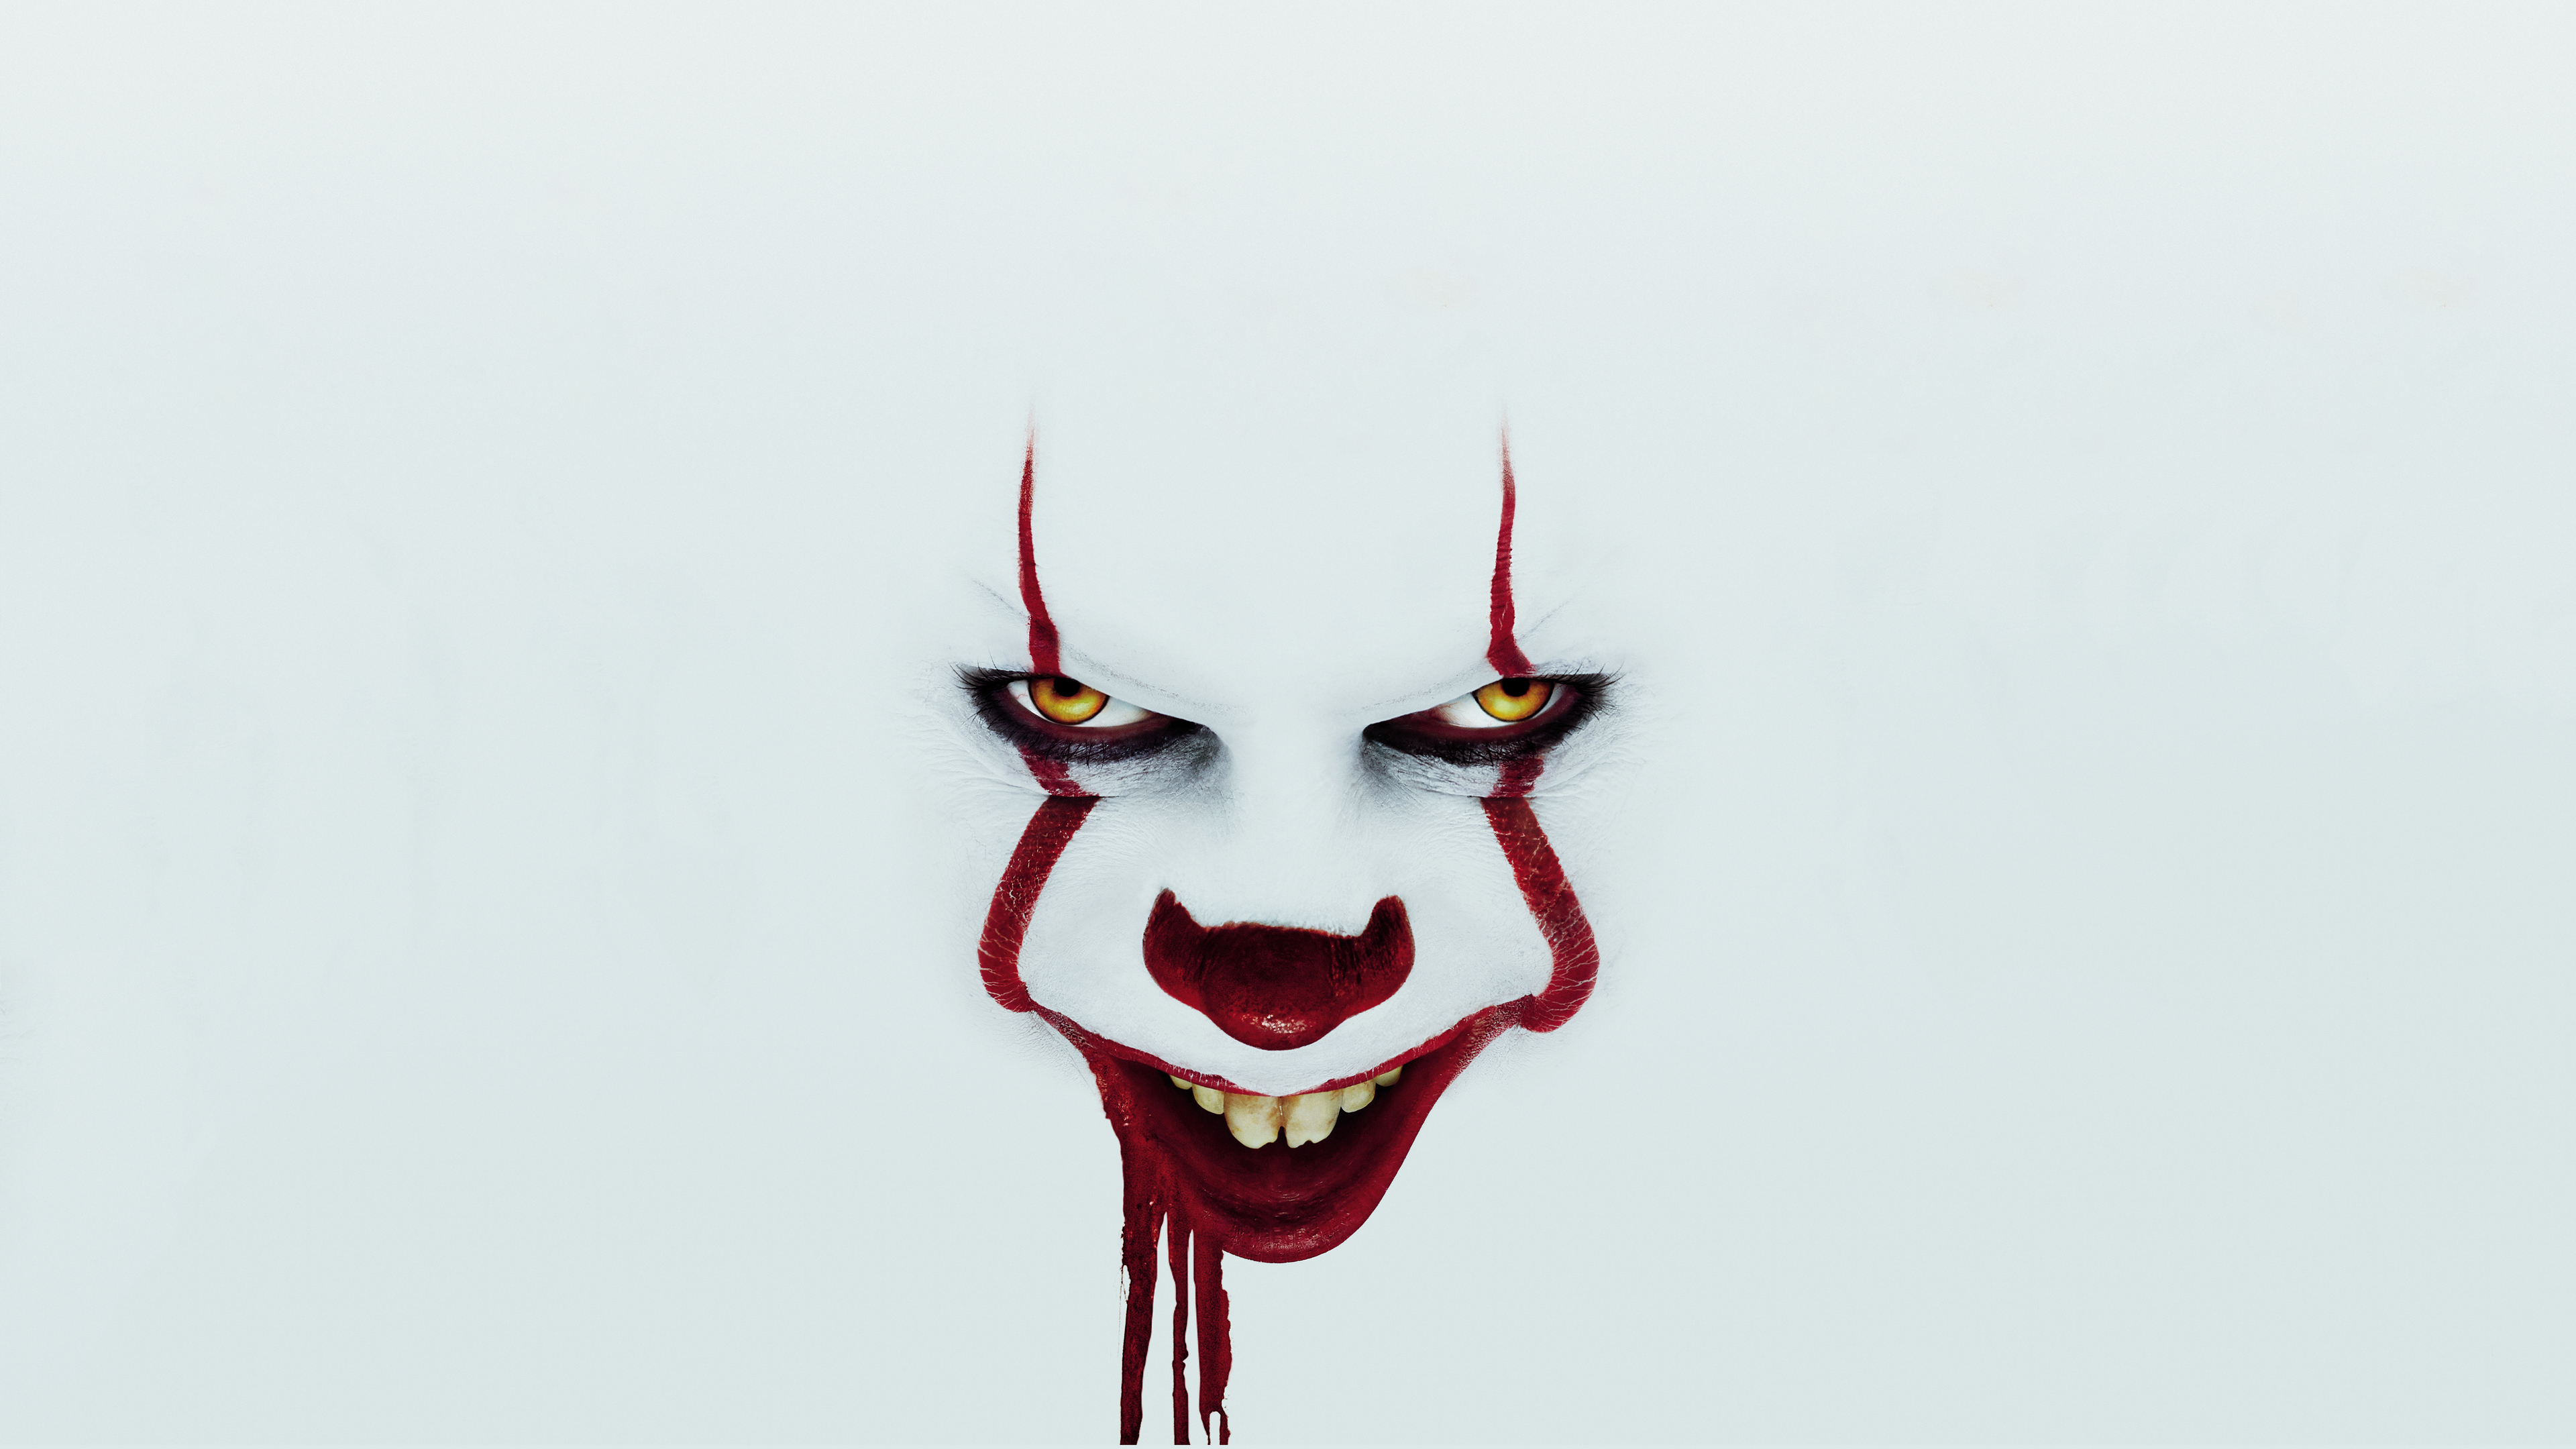 it chapter two 2019 blood drop 1569187387 - It Chapter Two 2019 Blood Drop - movies wallpapers, it wallpapers, it chapter two wallpapers, hd-wallpapers, 5k wallpapers, 4k-wallpapers, 2019 movies wallpapers